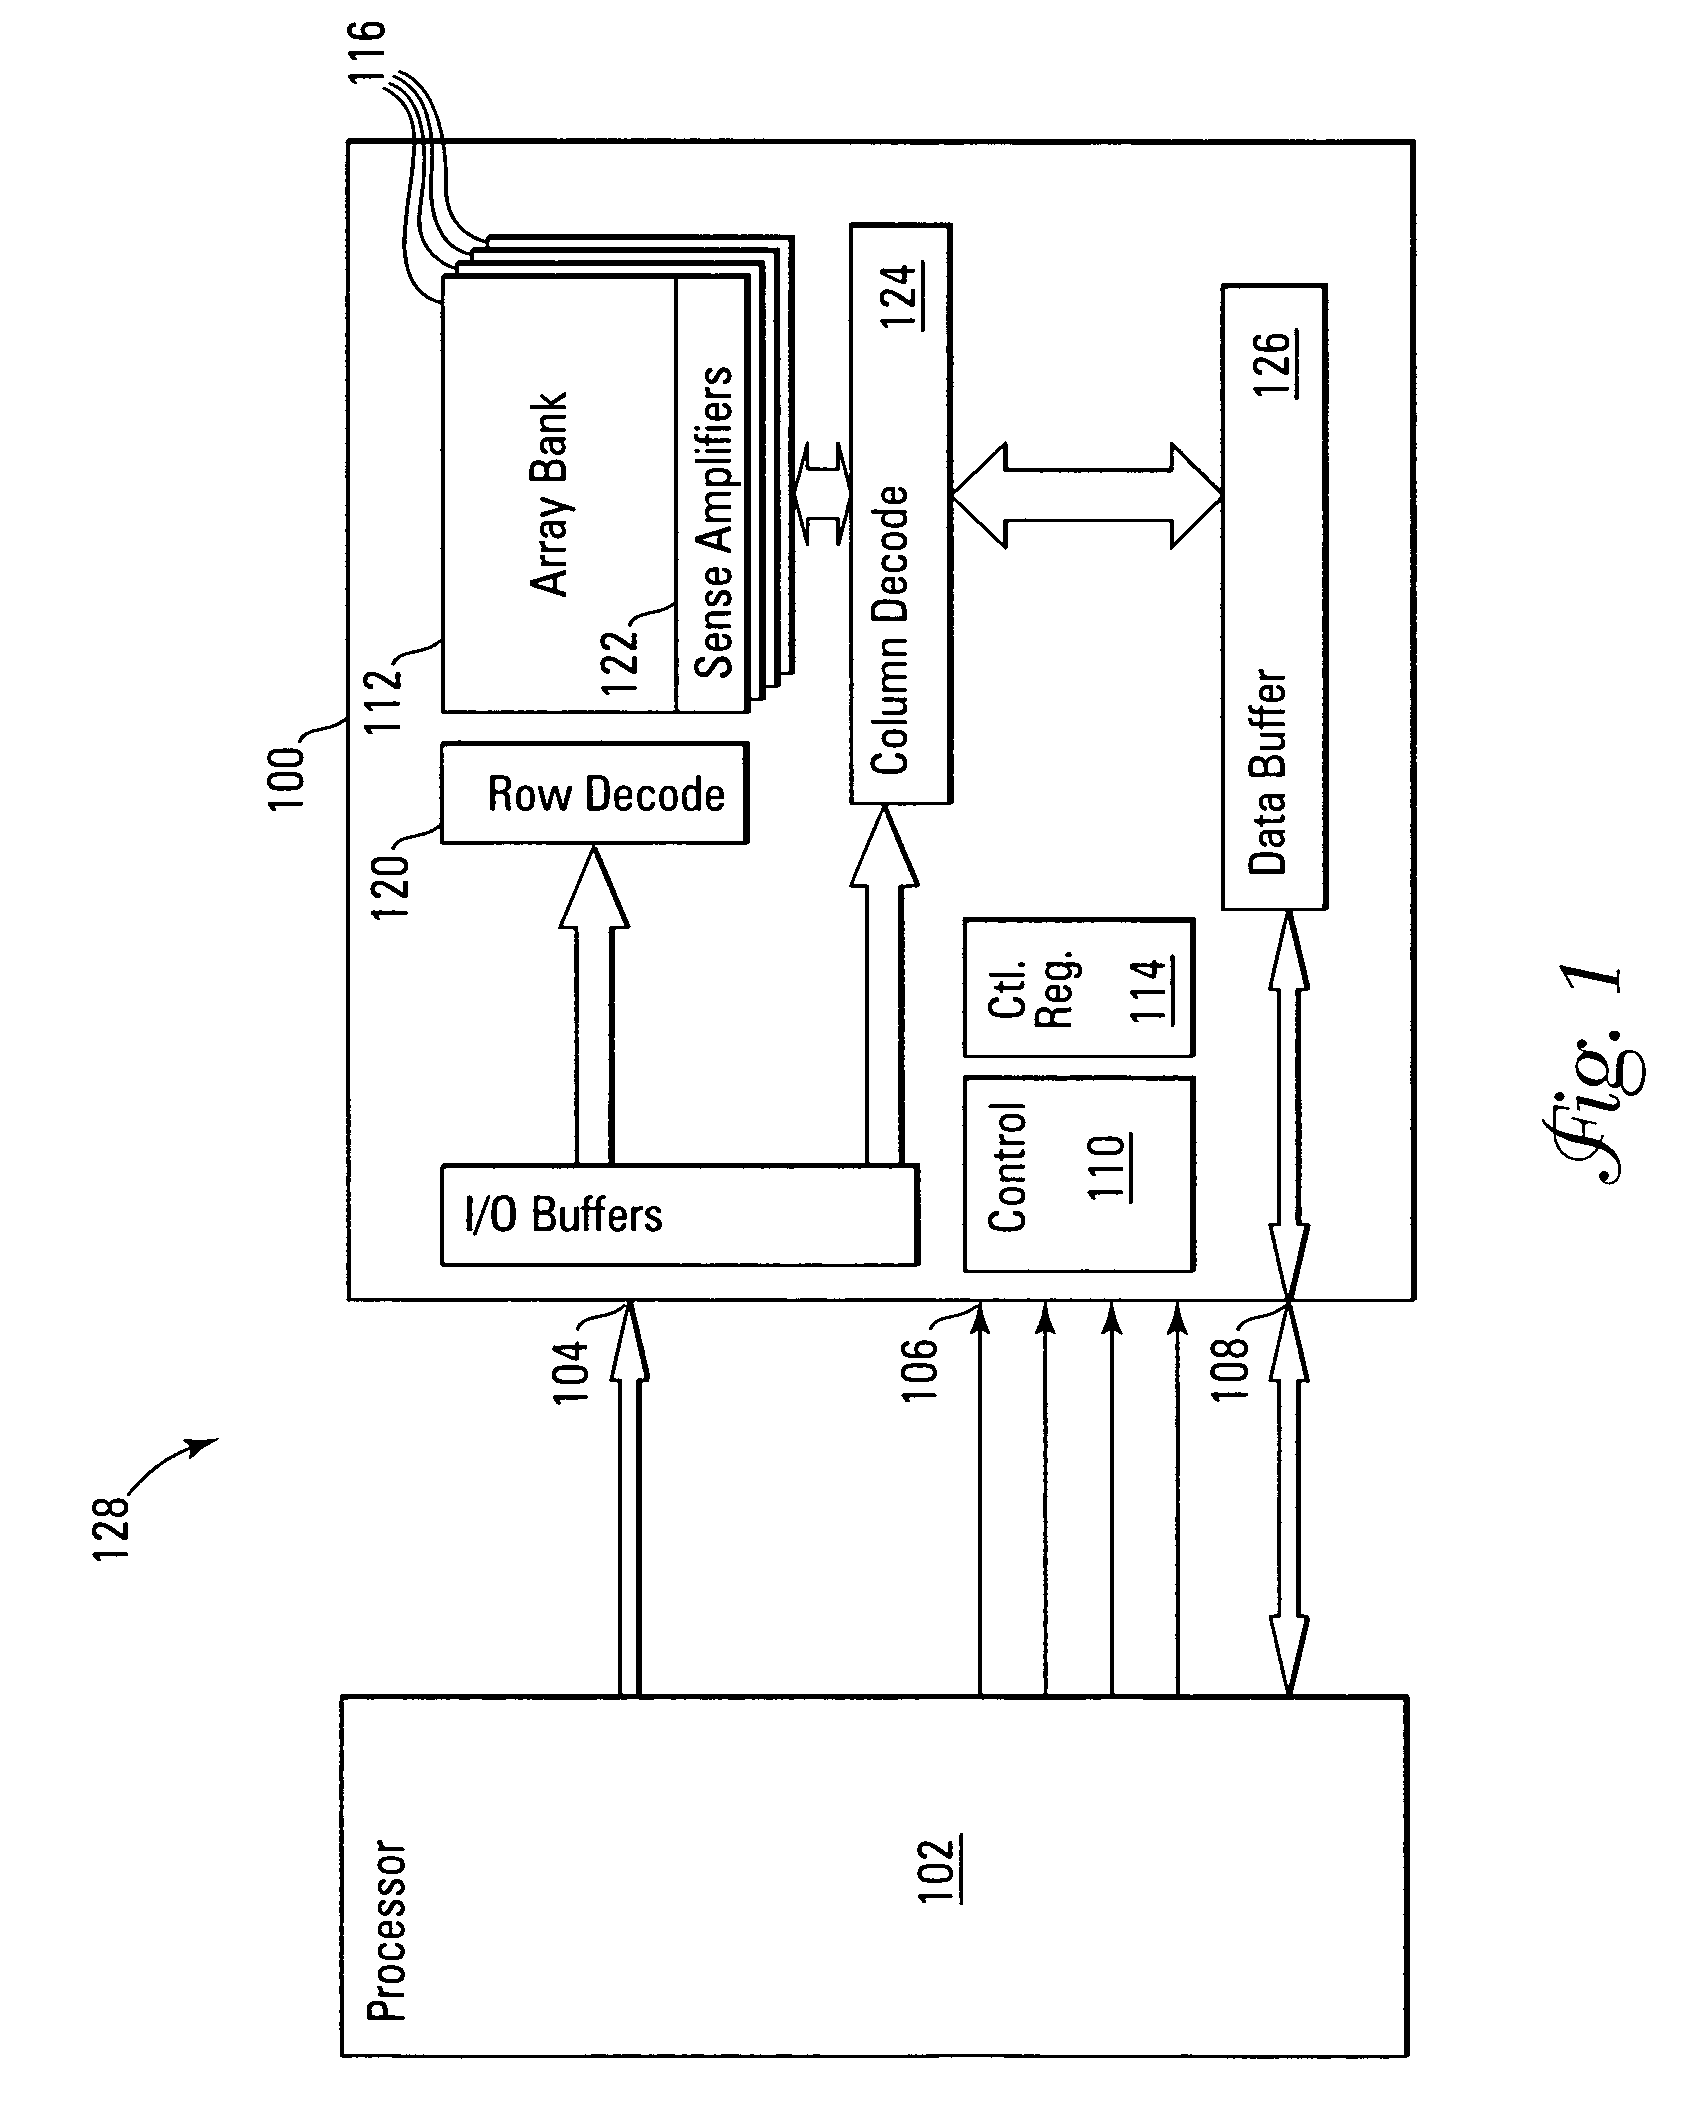 Method for testing flash memory power loss recovery